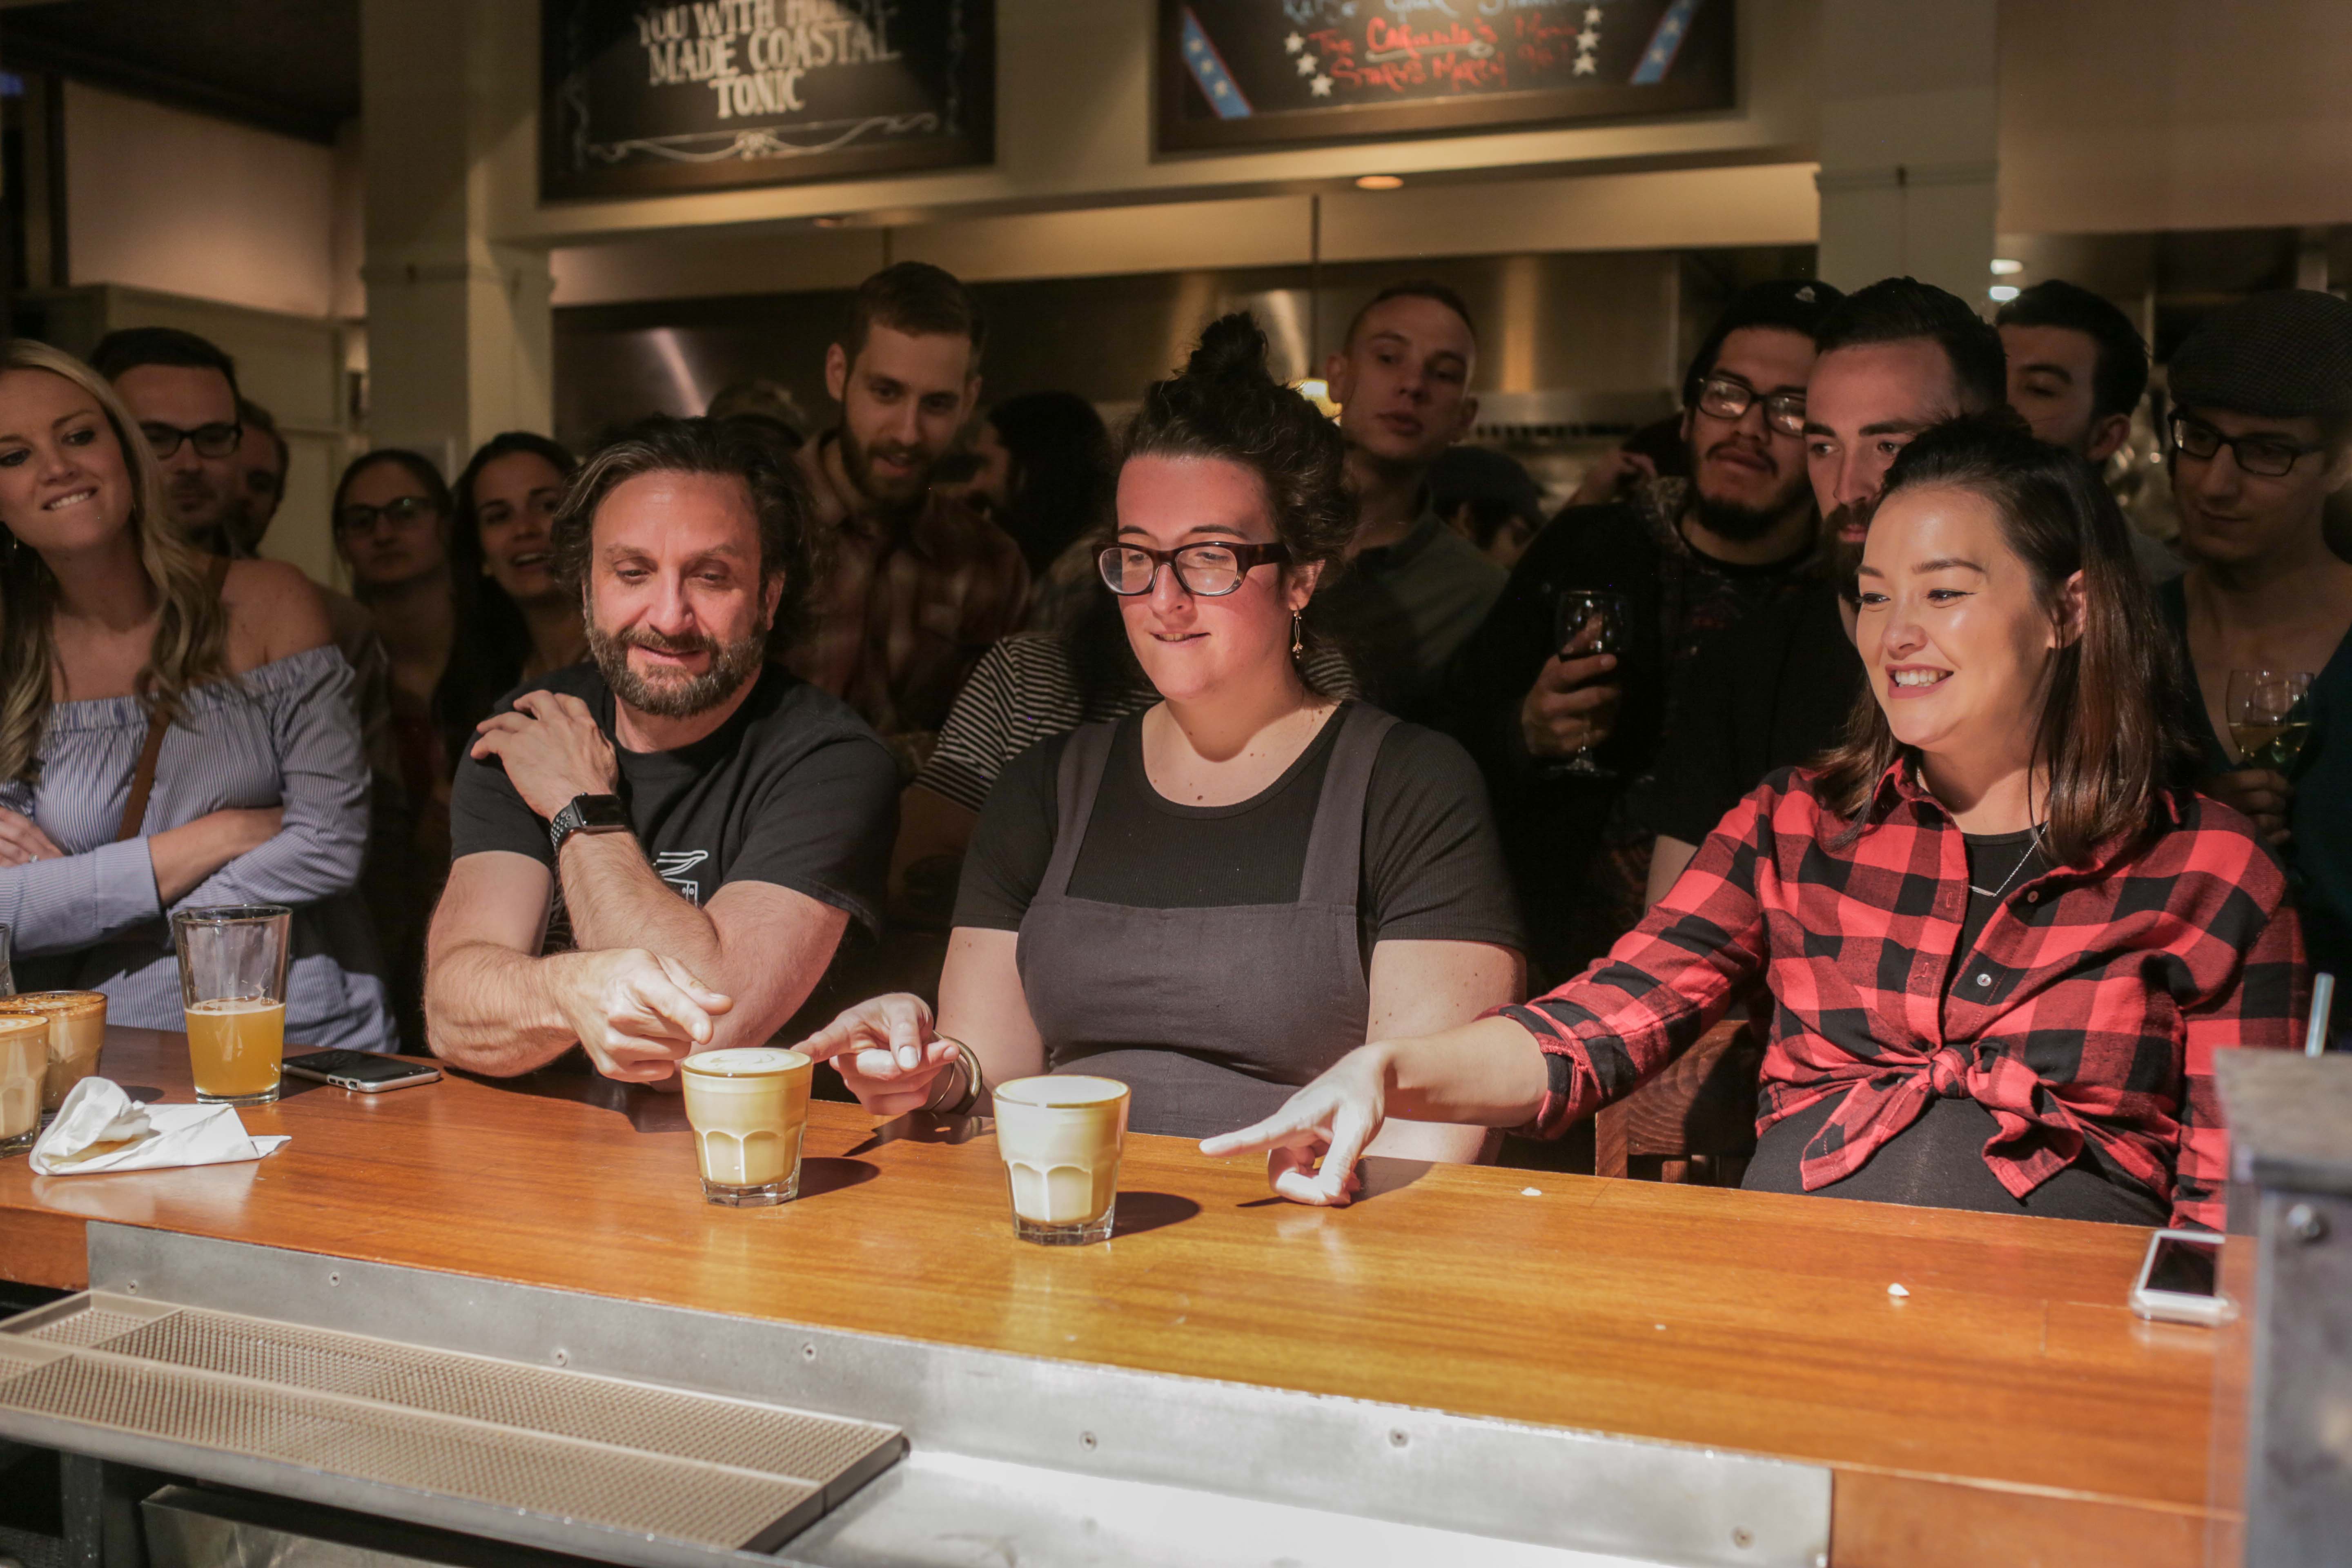 Our honorary Slayer TNT judges pane from the Left, Jason Prefontaine -Founder & President Slayer Espresso, Alexis Hyde- Caffe Vita Educator, Sonja Chang- Seattle food blogger @Seattle_Bites (Instagram). 